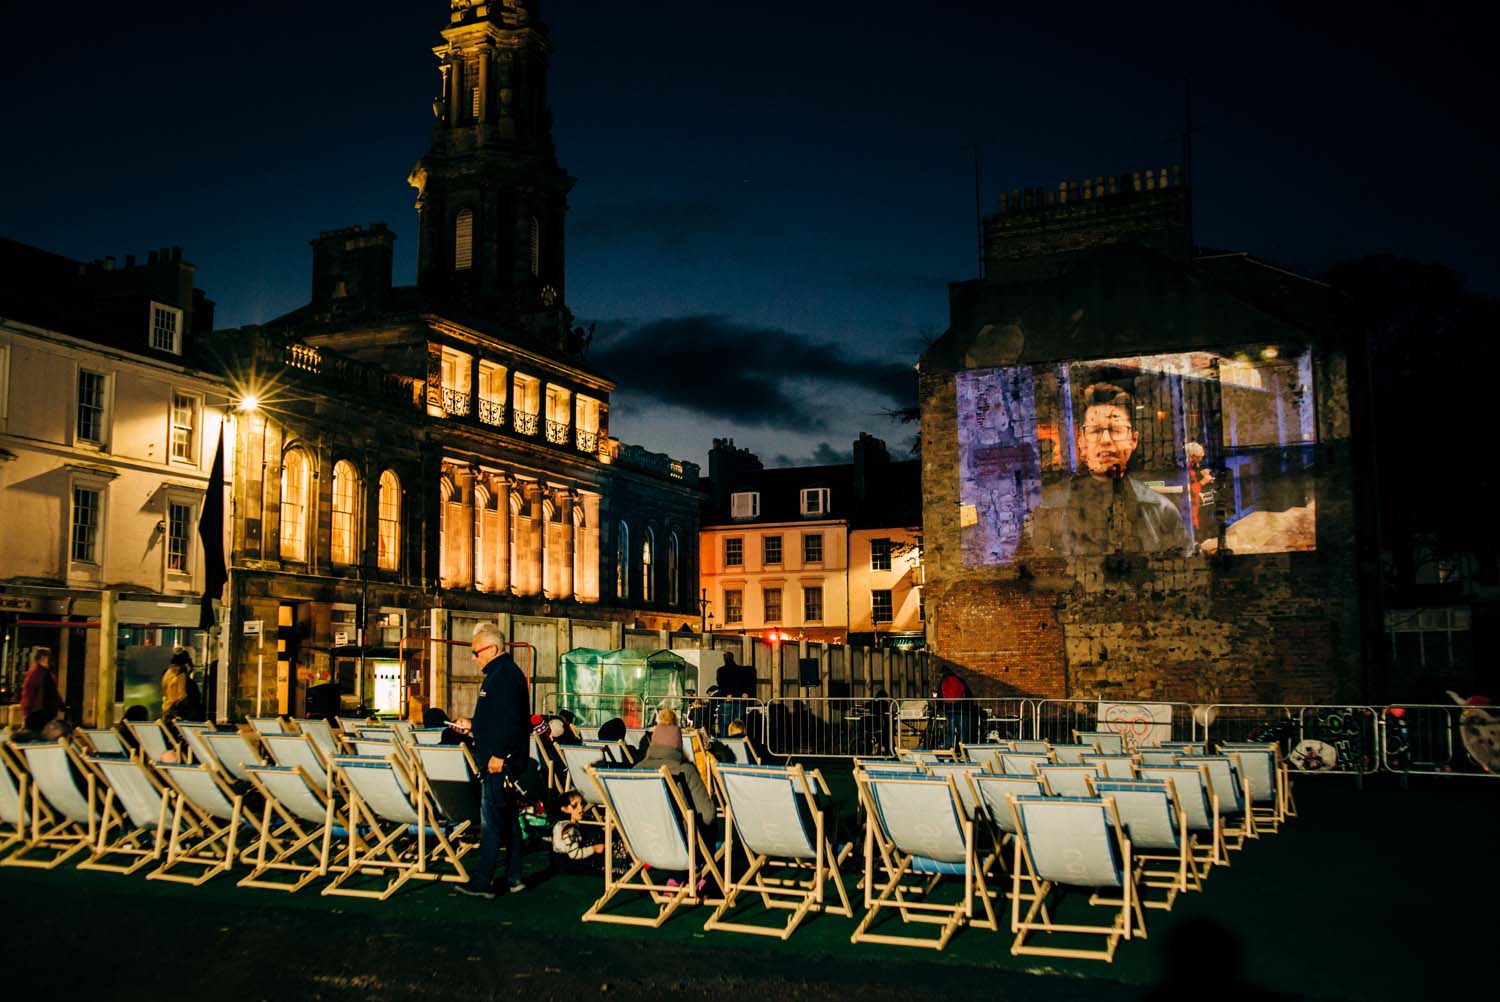 An outdoor film screening in a square with a number of rows of deckchairs and people watching a film projected on a gable end of a stone building